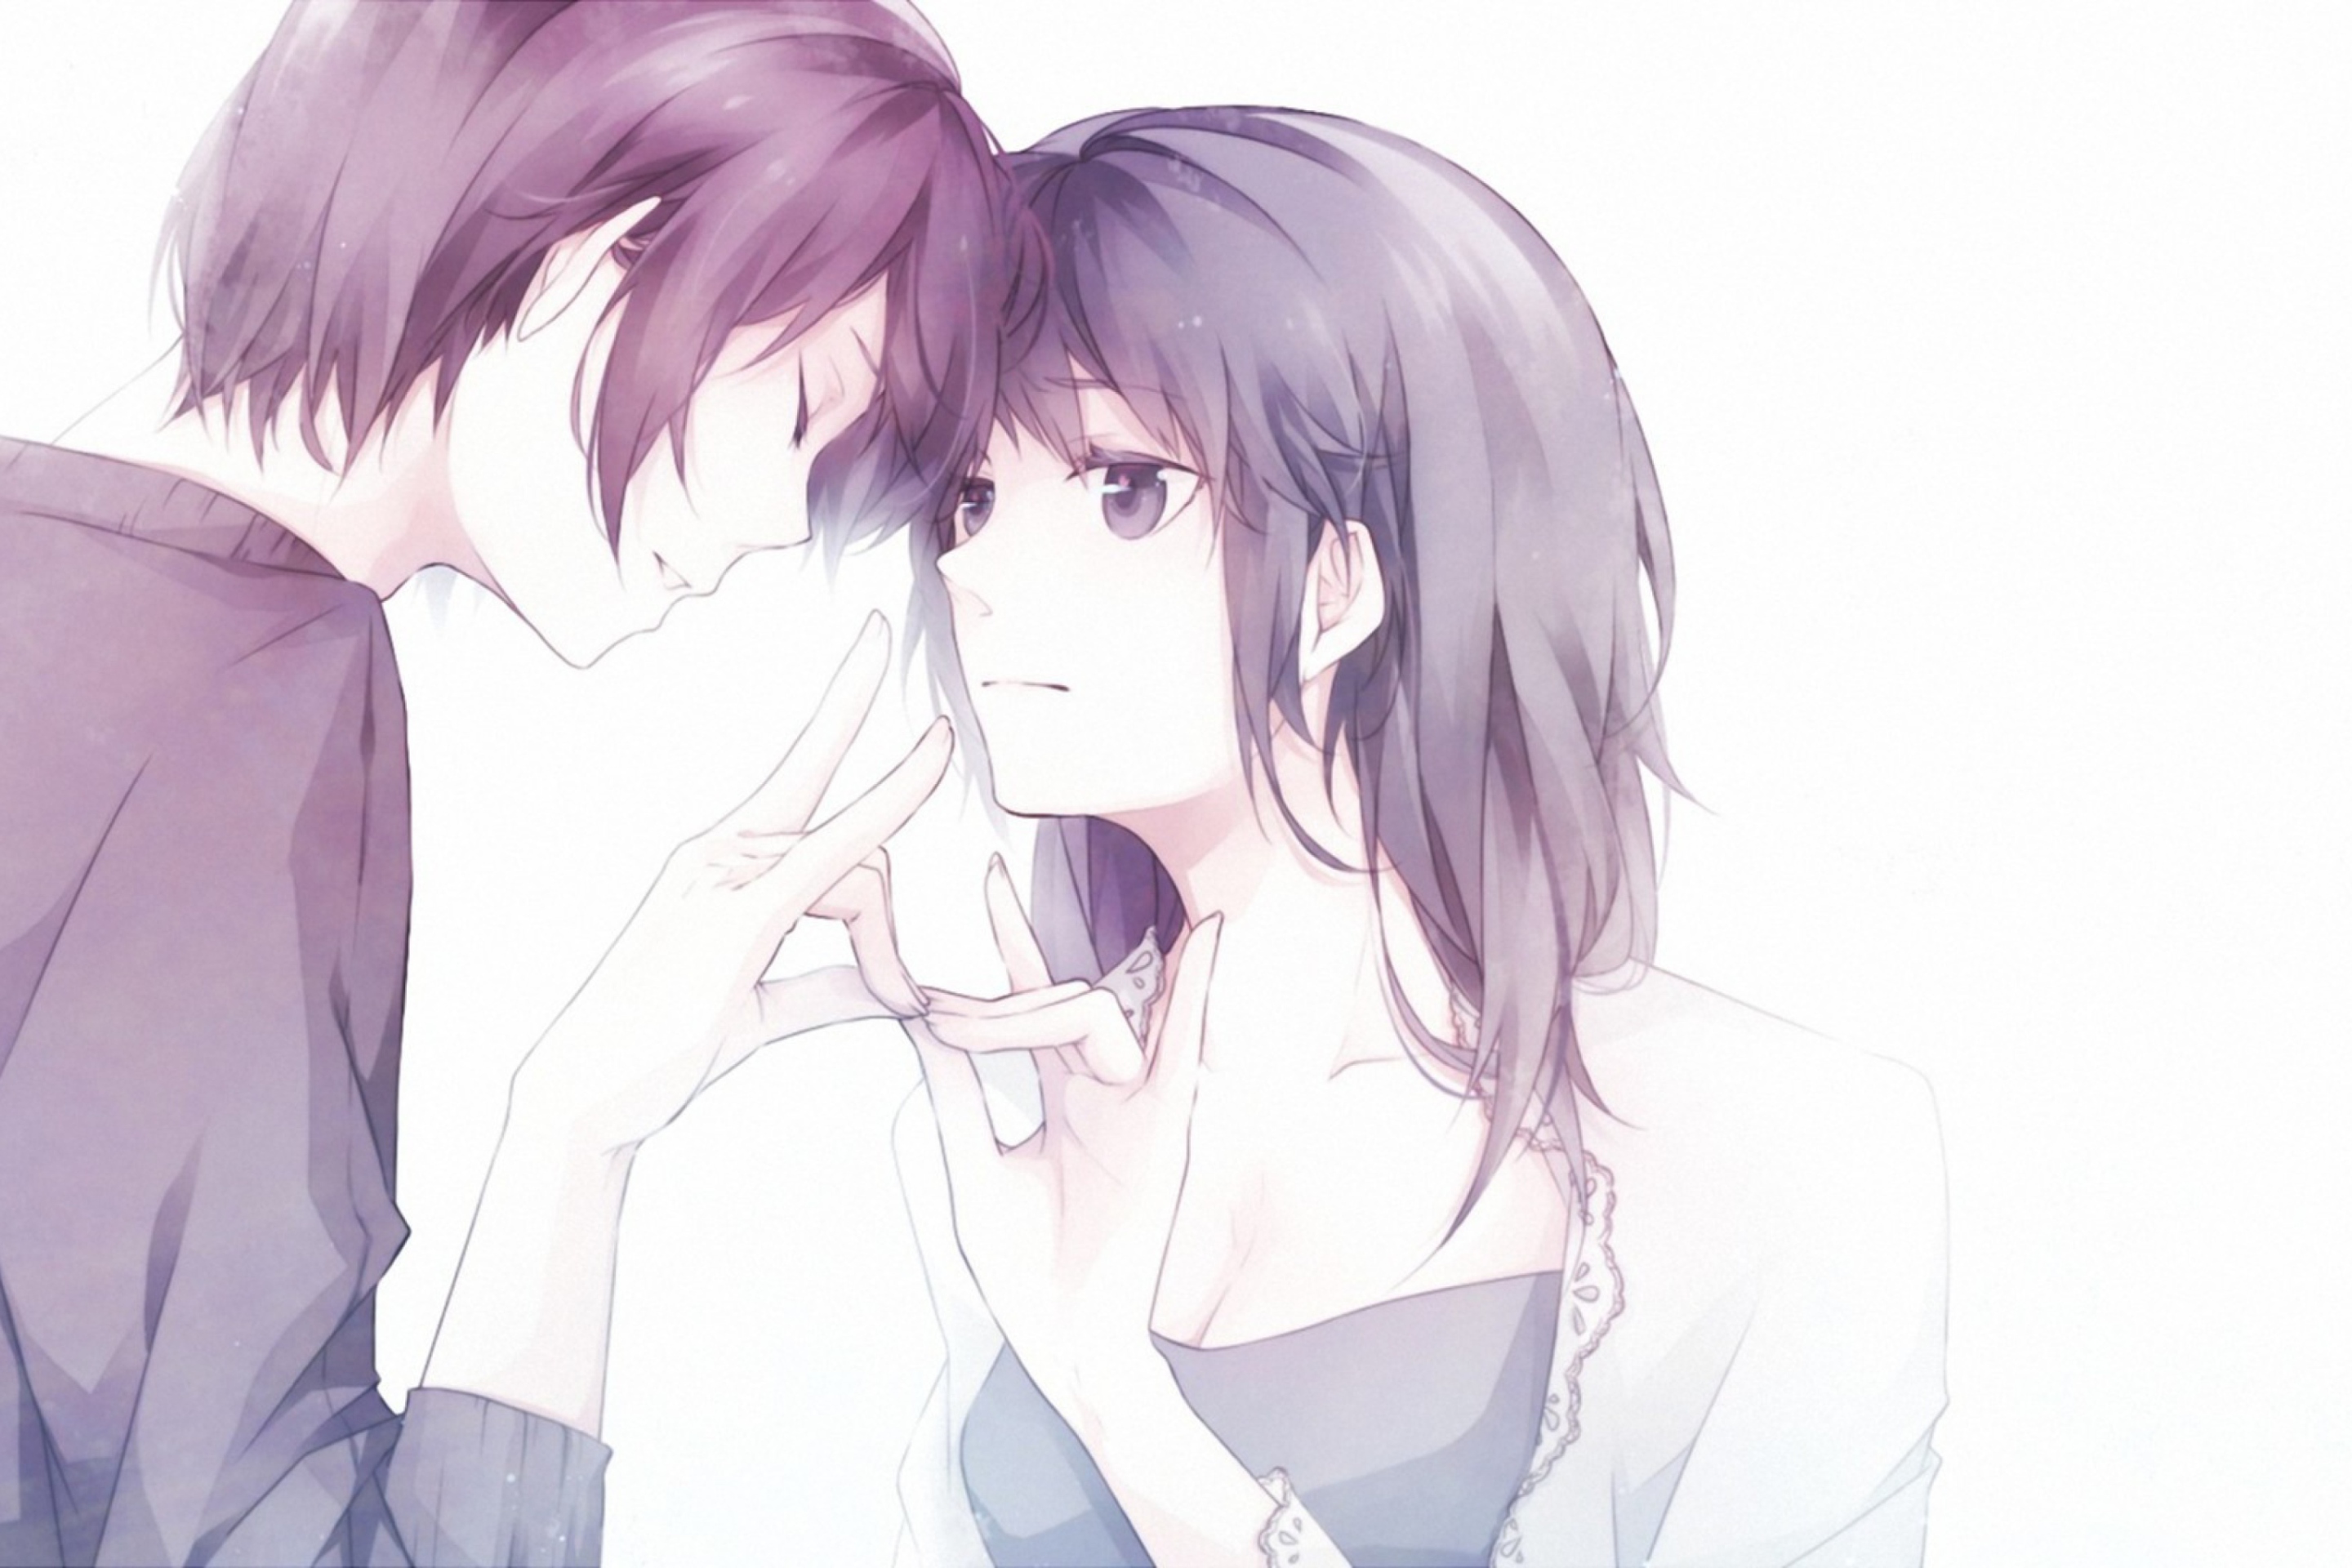 Guy And Girl With Violet Hair wallpaper 2880x1920